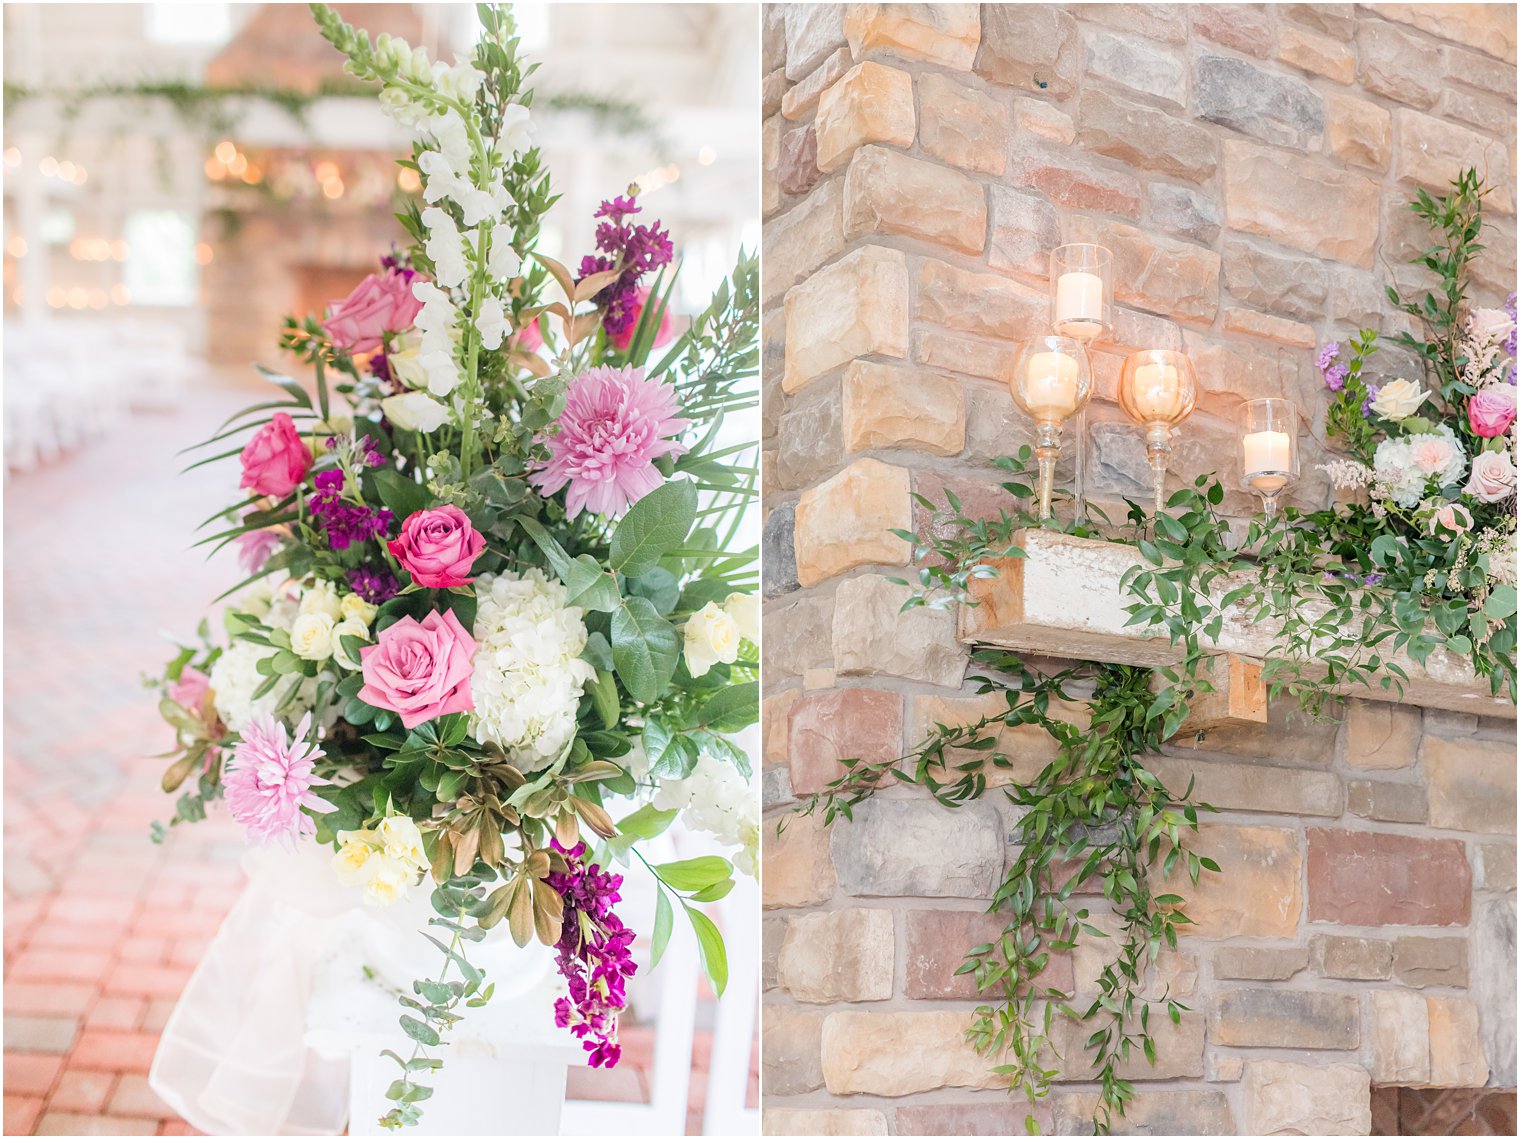 pink and purple floral displays for ceremony at Ashford Estate